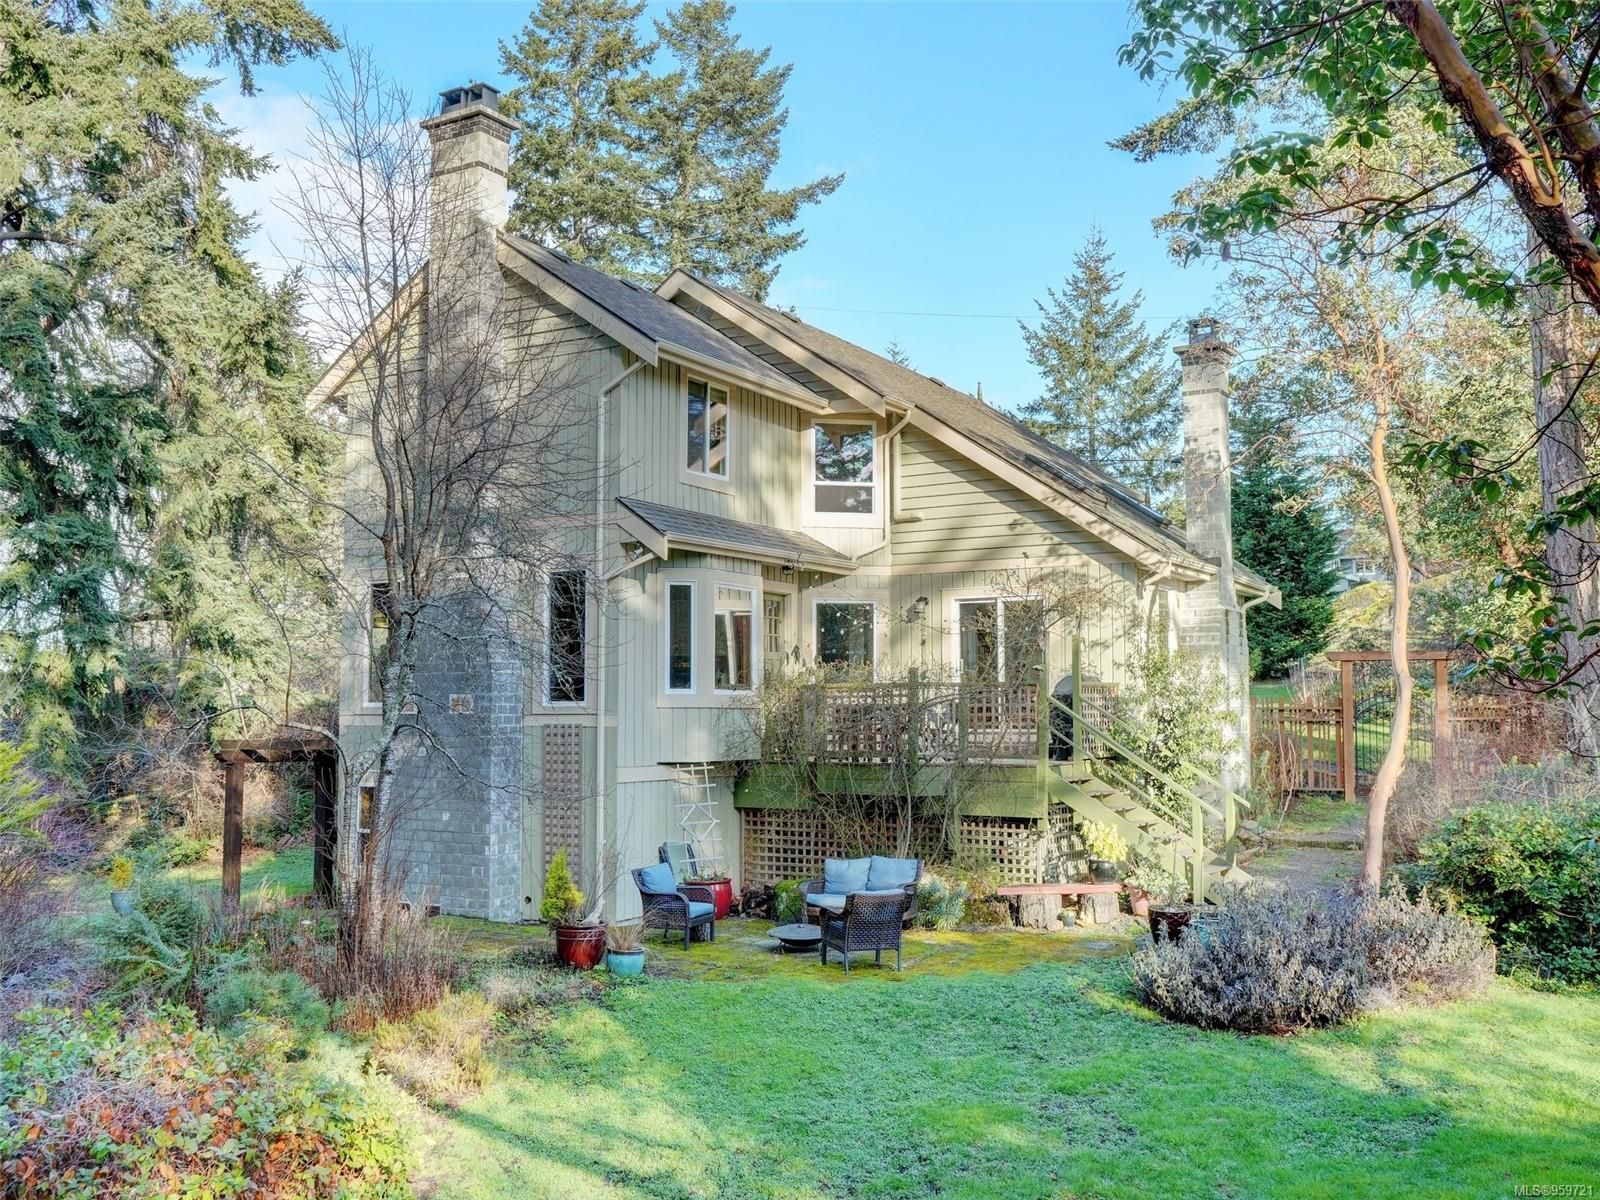 Open House. Open House on Sunday, April 28, 2024 11:00AM - 12:30PM
This beautiful 4 bed, 4 bath 3000 sq ft home with suite potential is on a 1 acre lot with attached double car garage. Located in popular Albert Head area of Metchosin it’s adjacent to Roya